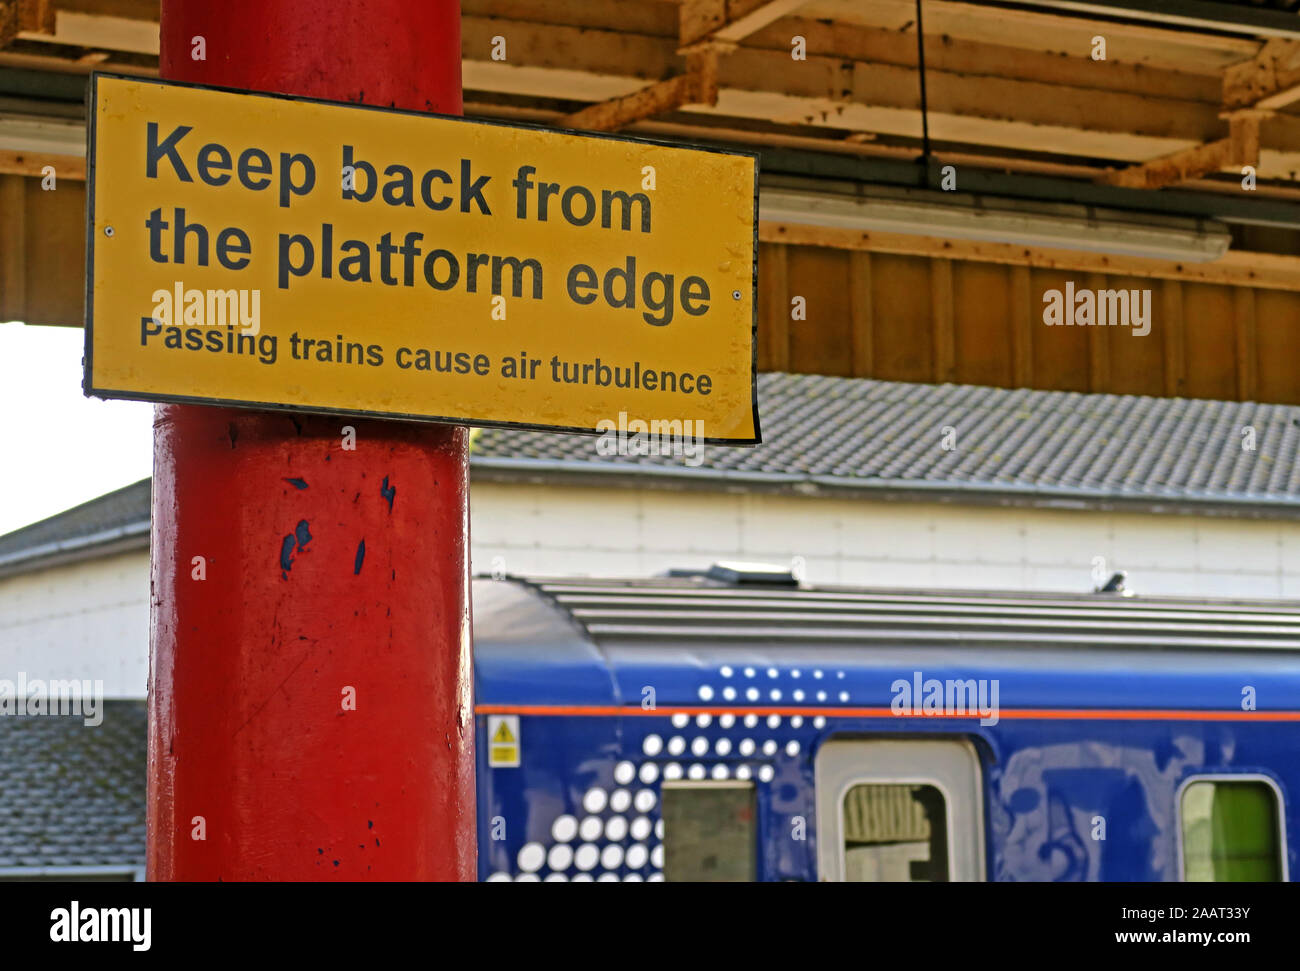 Keep back from the platform edge, yellow sign,passing trains cause air turbulence,on platform,high speed trains Stock Photo